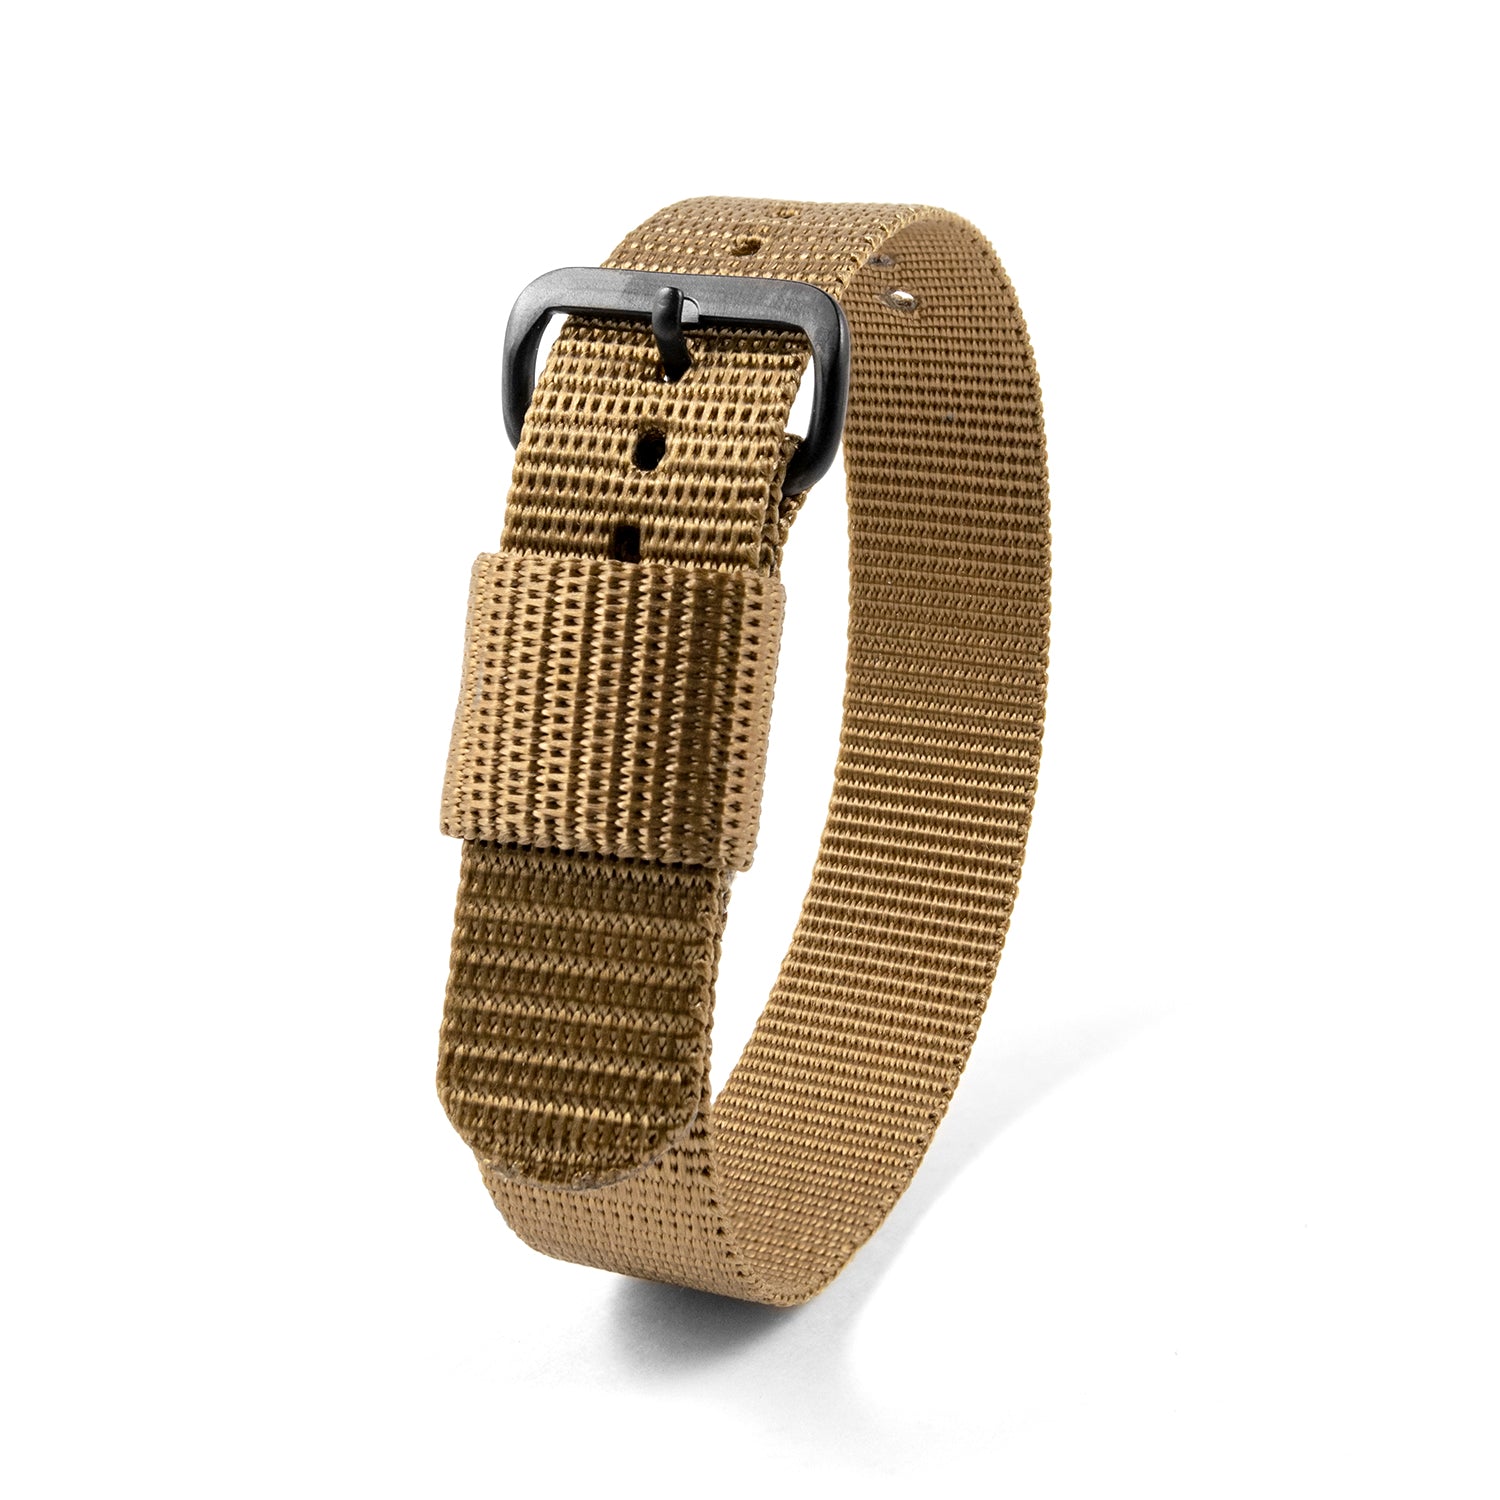 16mm - 10" Length - Ballistic Nylon Watch Band/Strap with Stainless Steel Buckle - marathonwatch  | WS-NY-DTBK-16-10